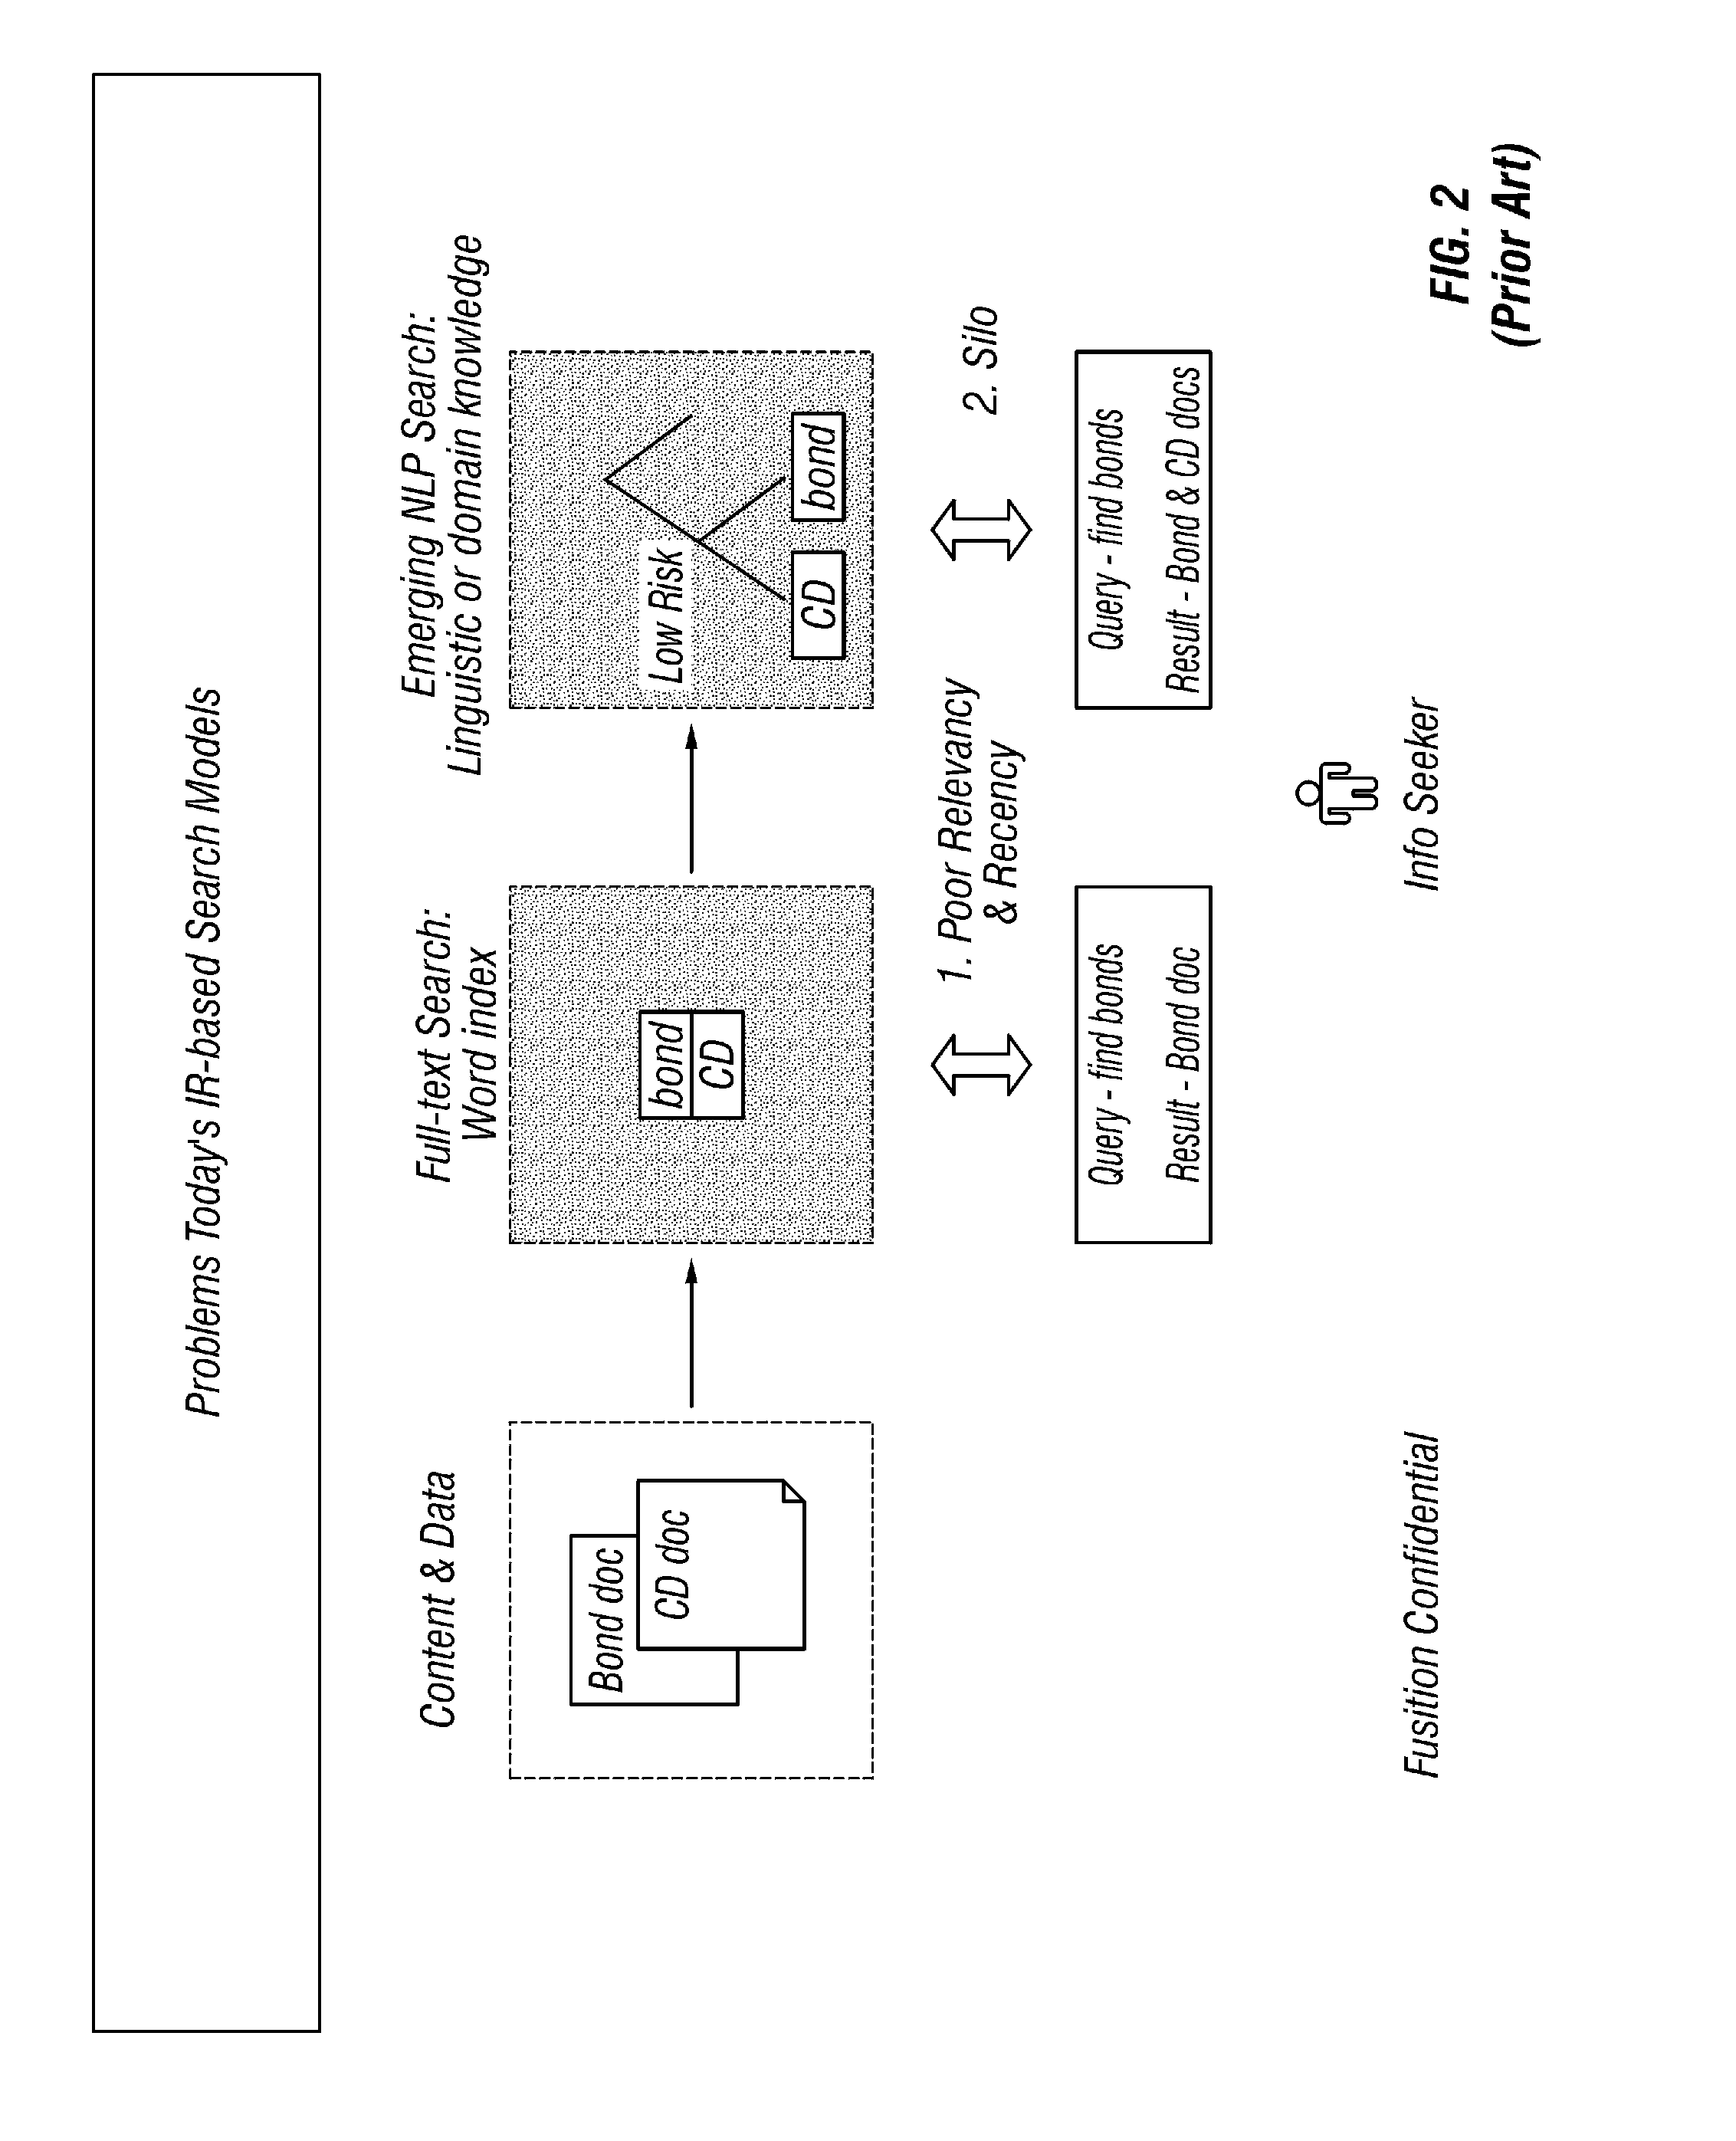 Method and apparatus for determining expertise based upon observed usage patterns